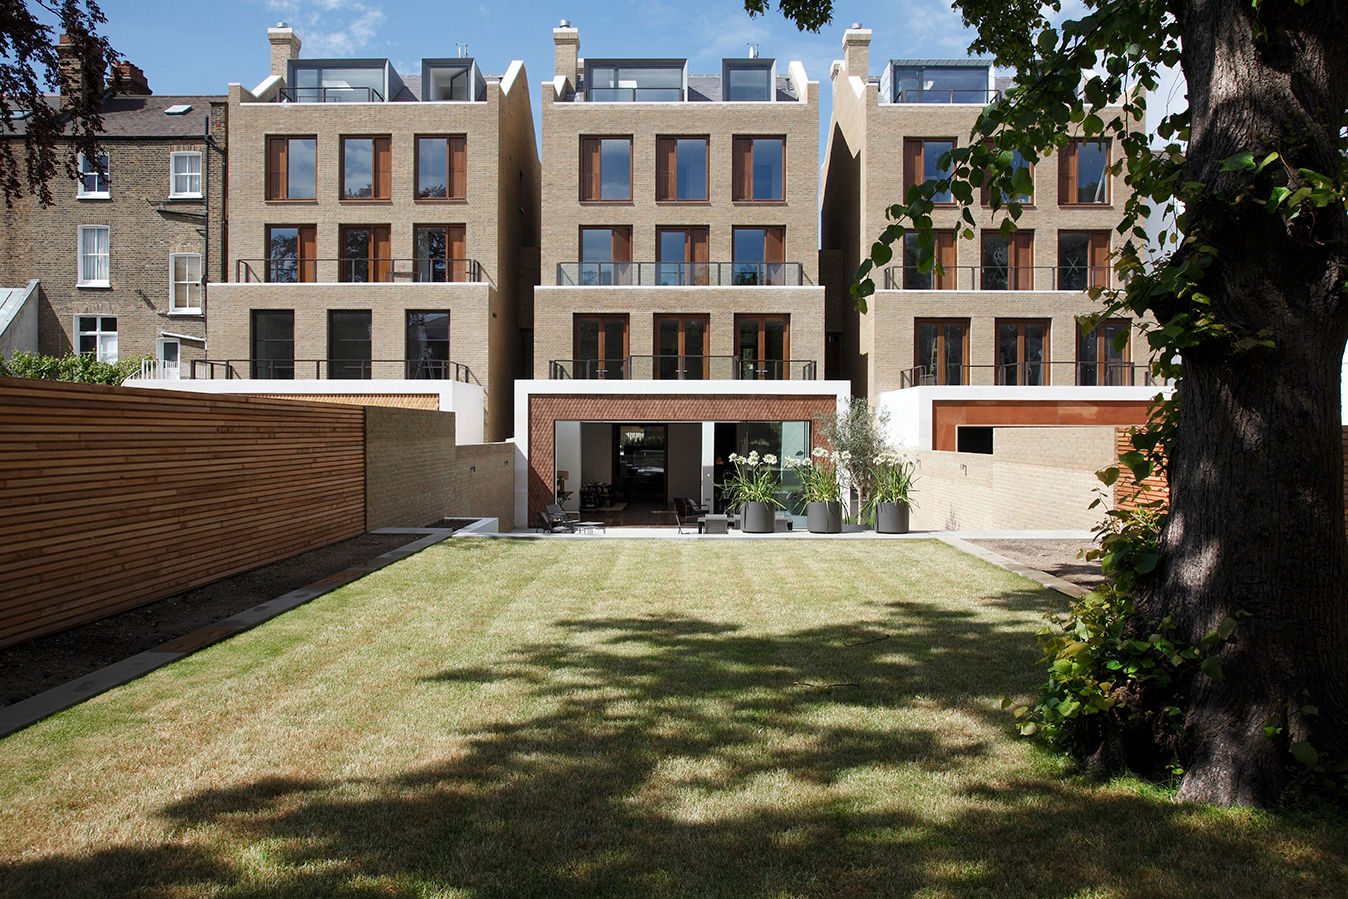 Macauley Road Townhouses, Clapham, Squire and Partners Squire and Partners Nowoczesny ogród